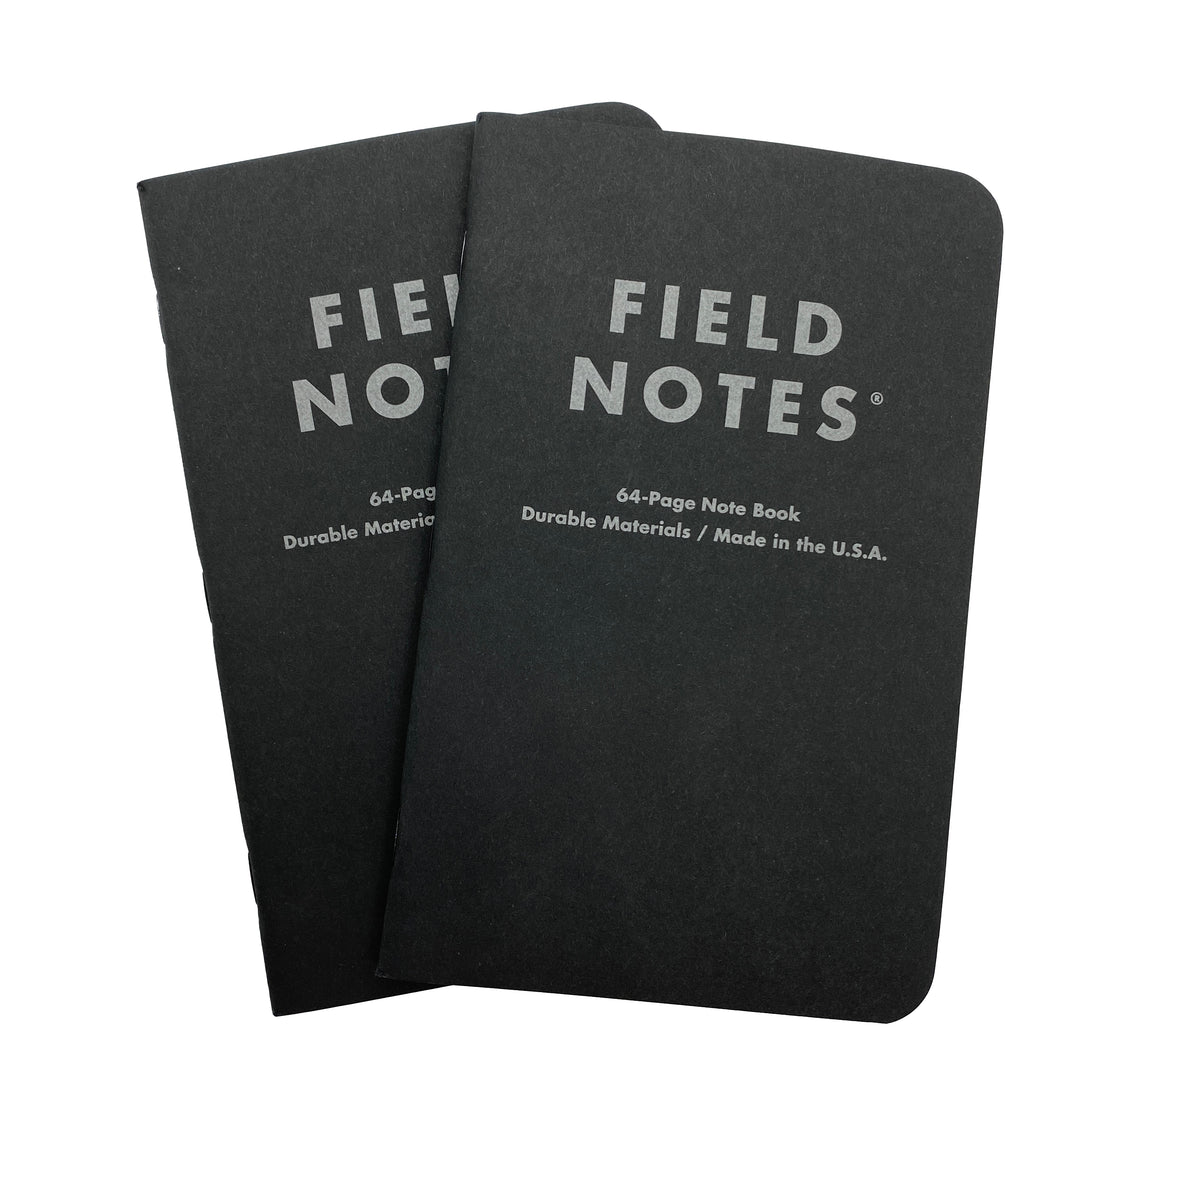 Field Notes: Pitch Black - Ruled Paper - Large 2-Pack